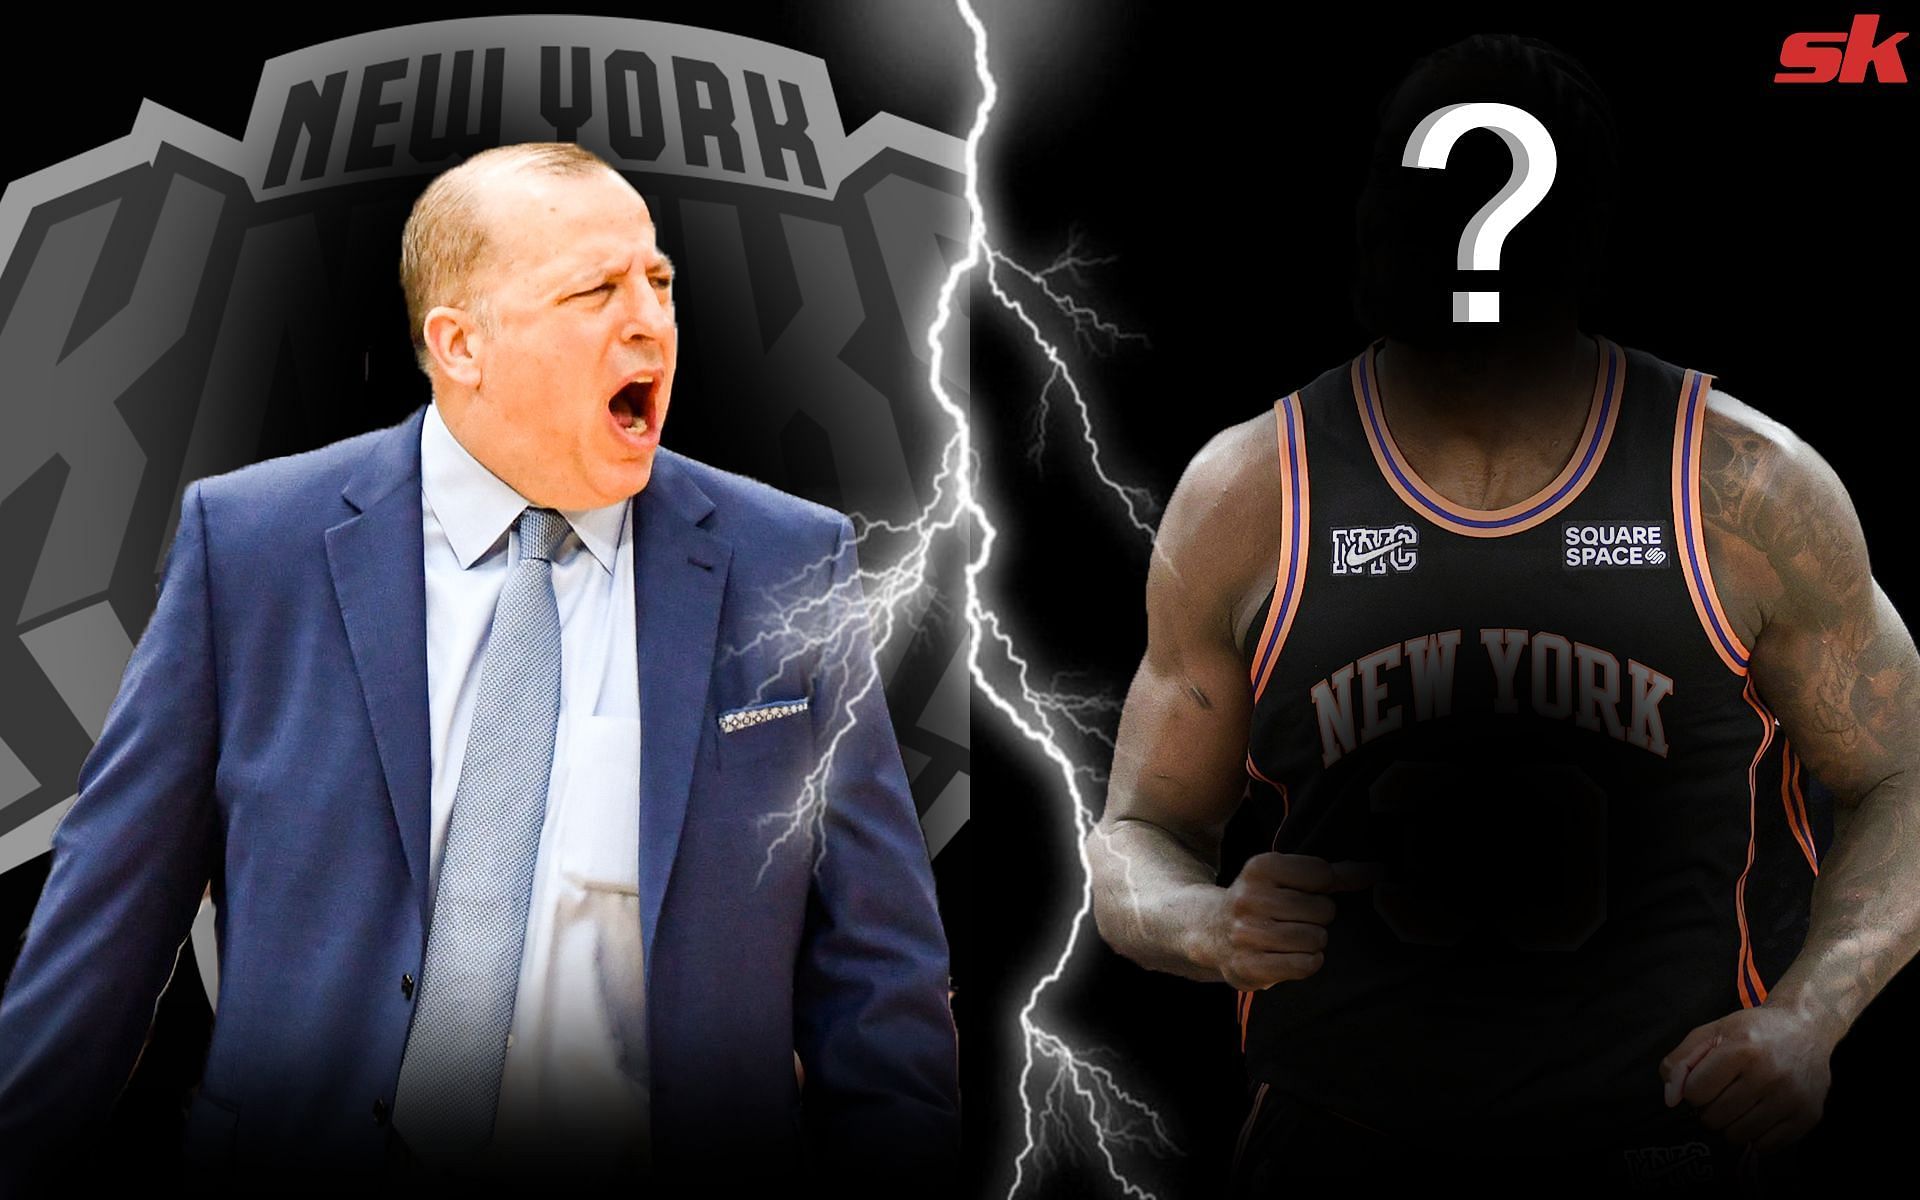 New York Knicks are reportedly looking to trade their All-Star due to issues with coach Tom Thibodeau